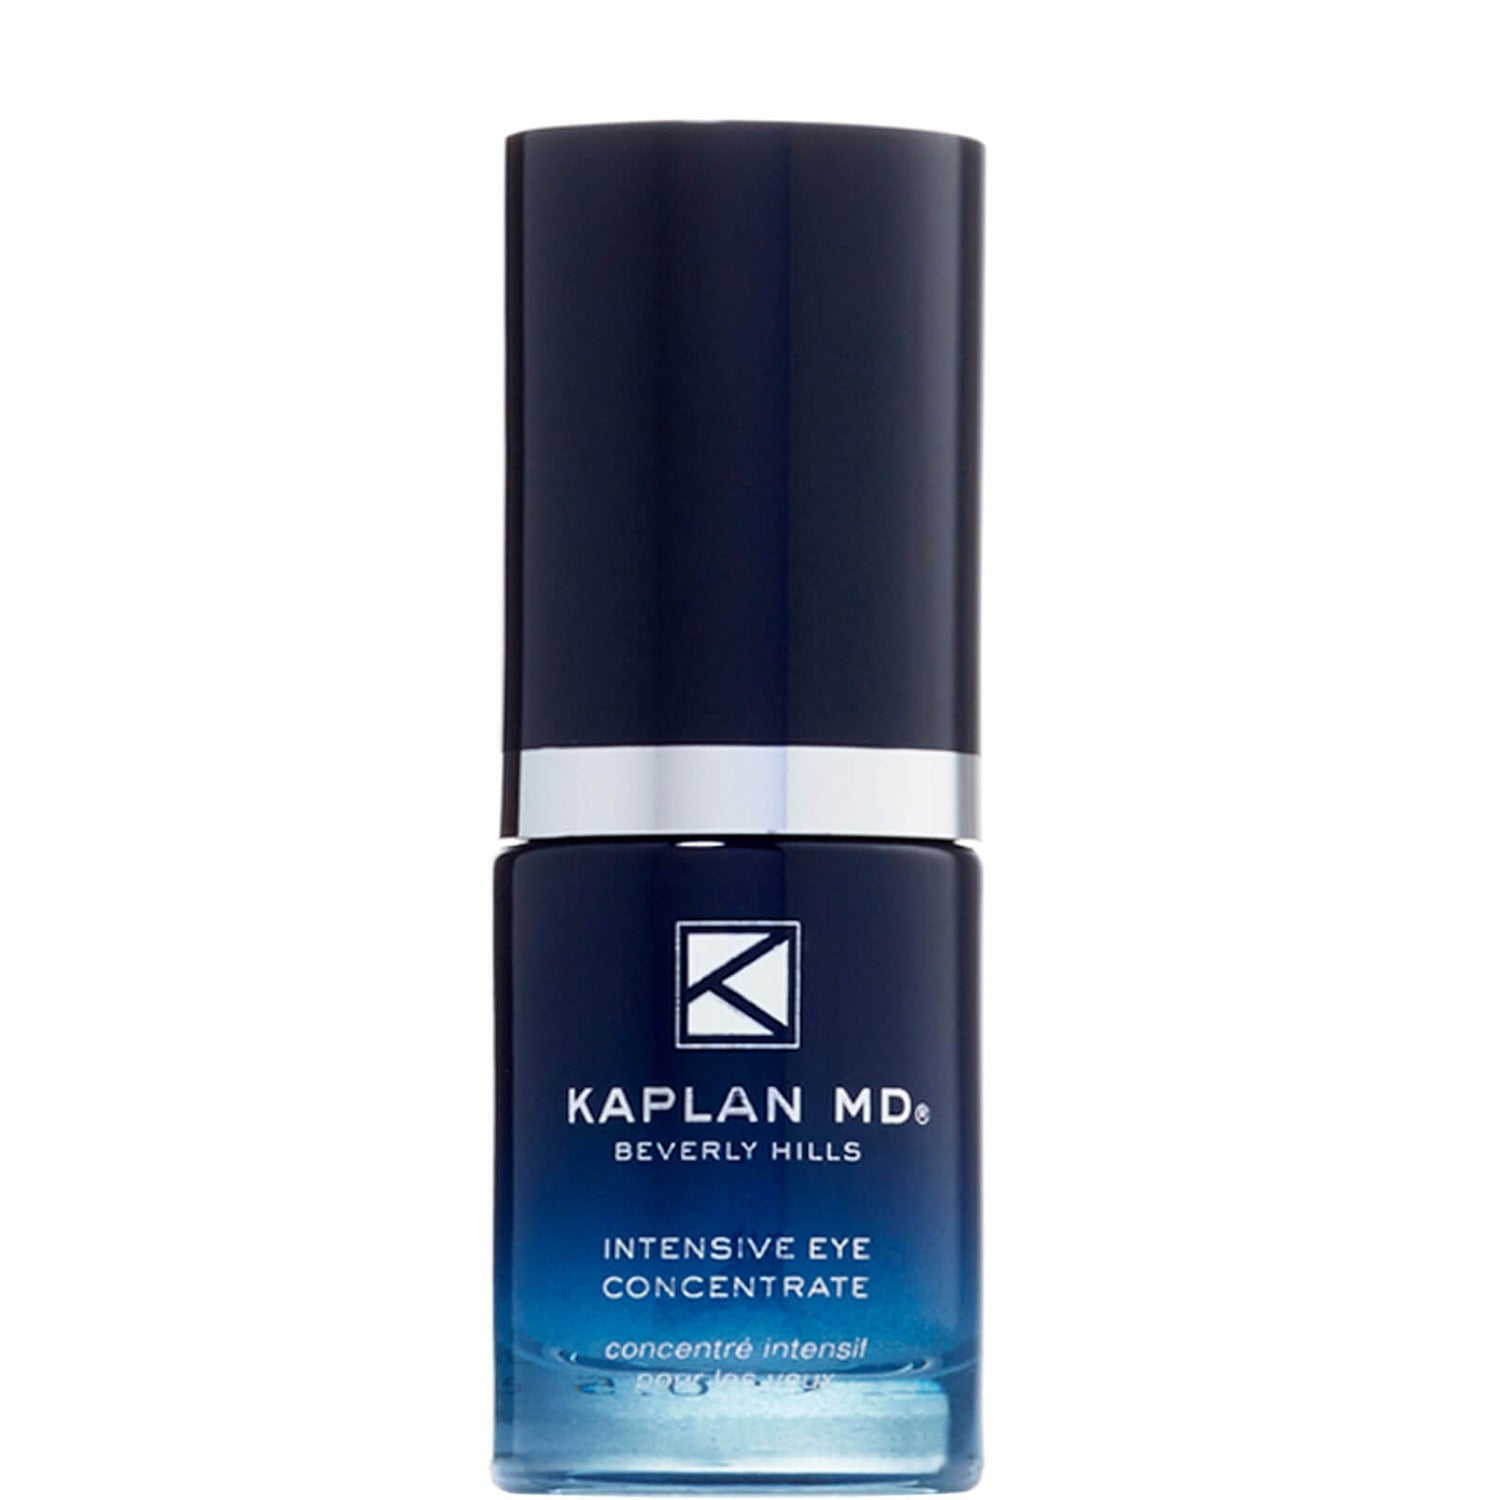 KaplanMD Intensive Eye Concentrate